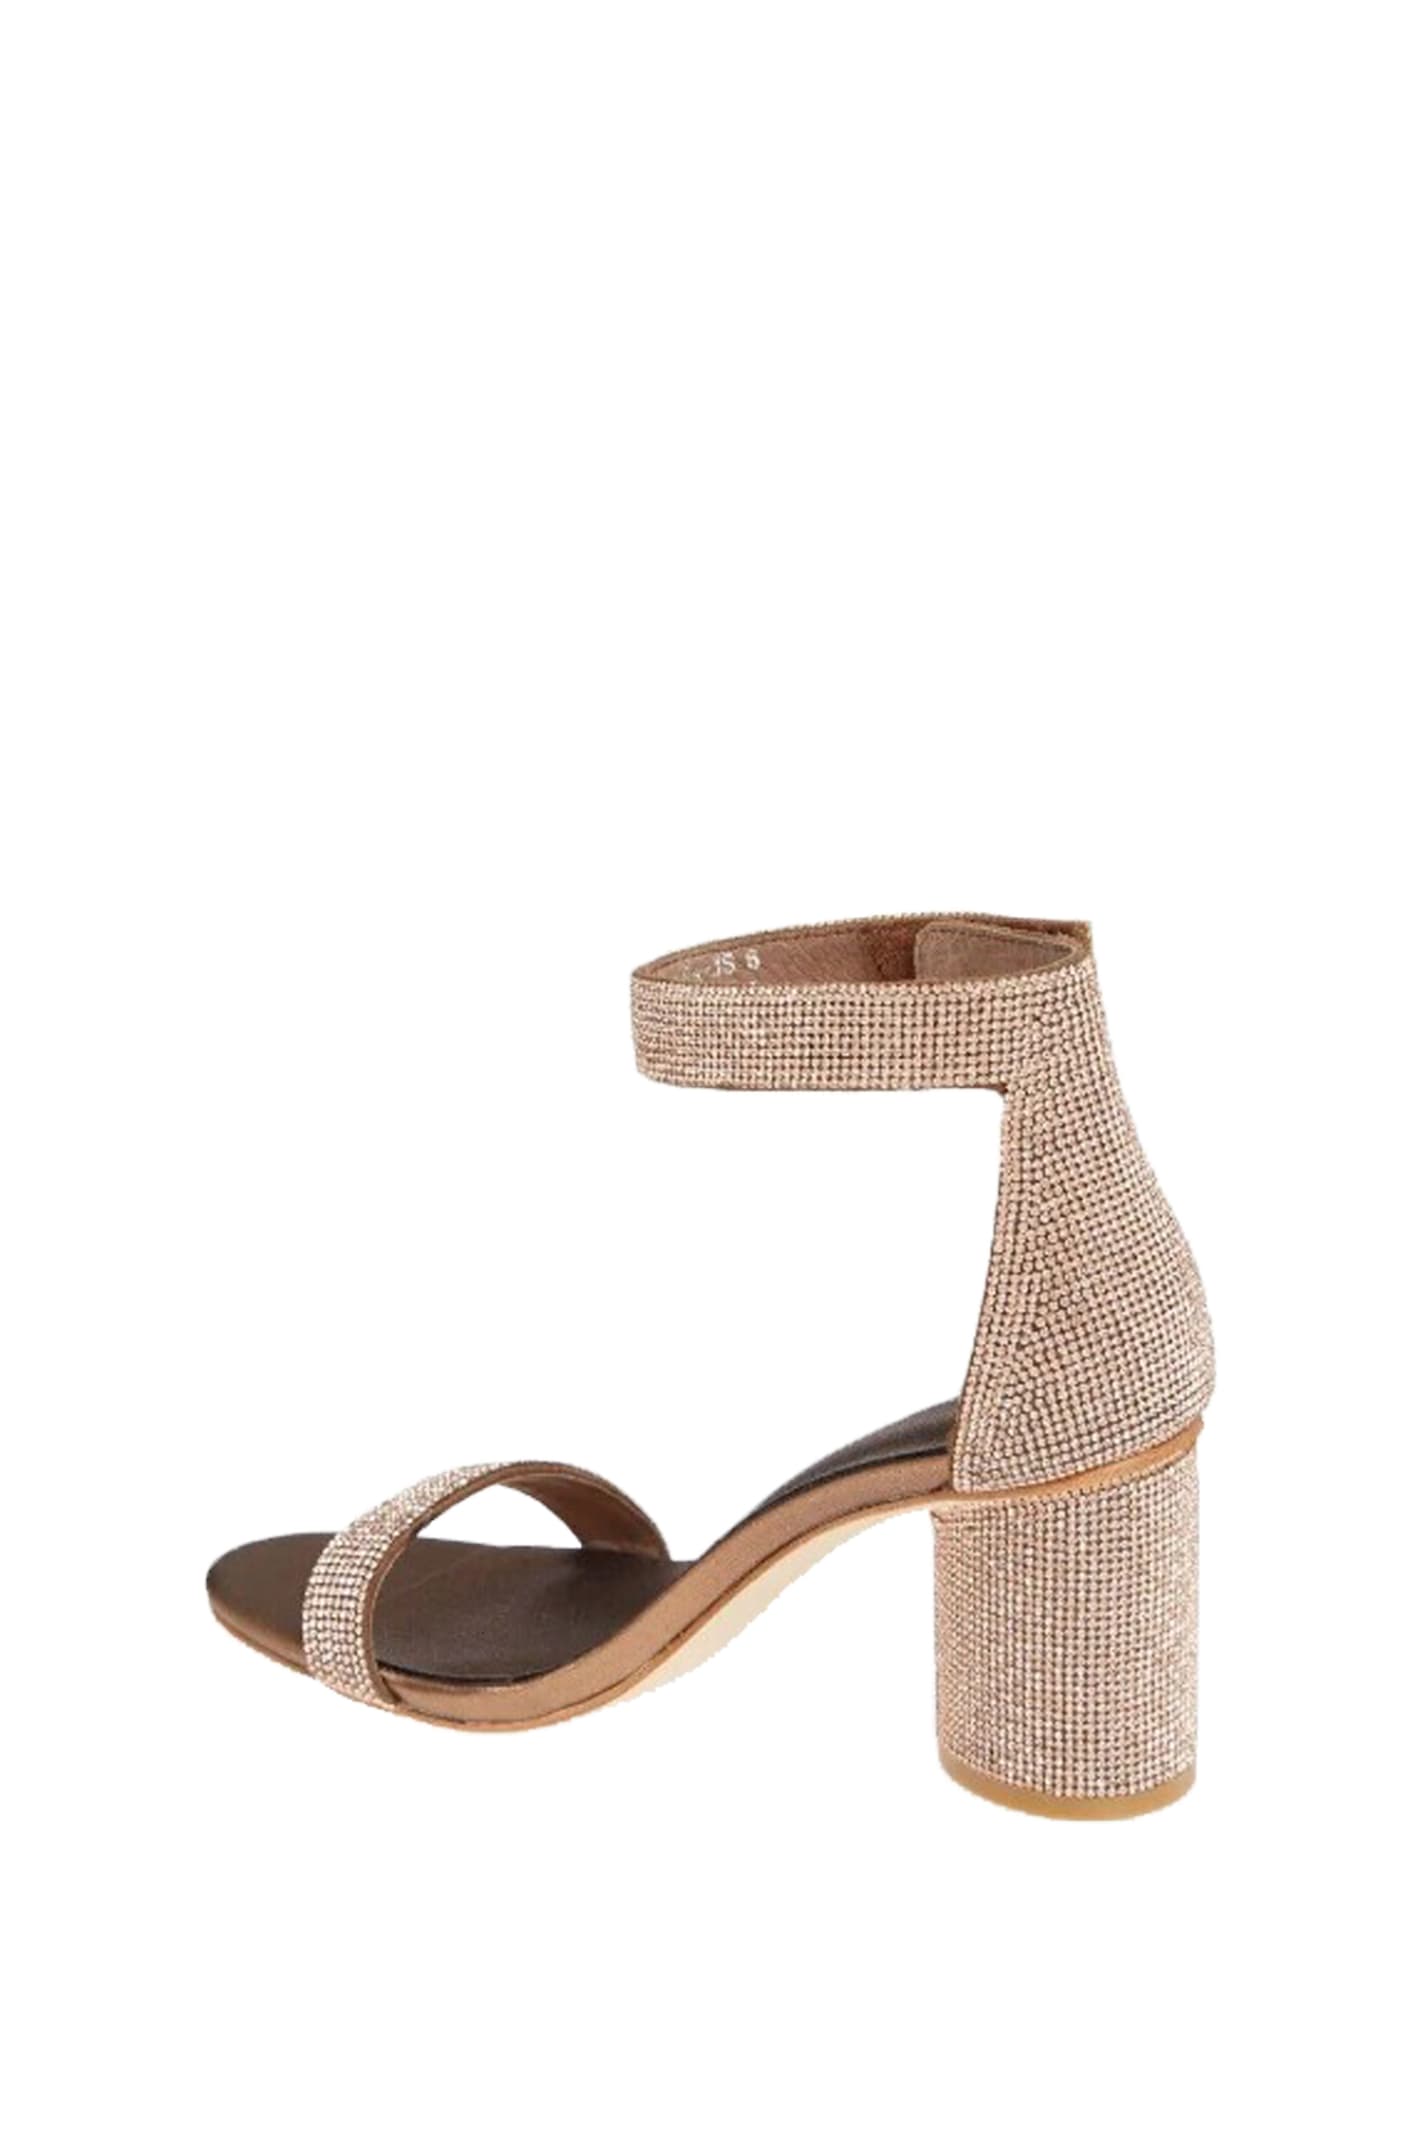 Shop Jeffrey Campbell Shoes With Heel In Brown